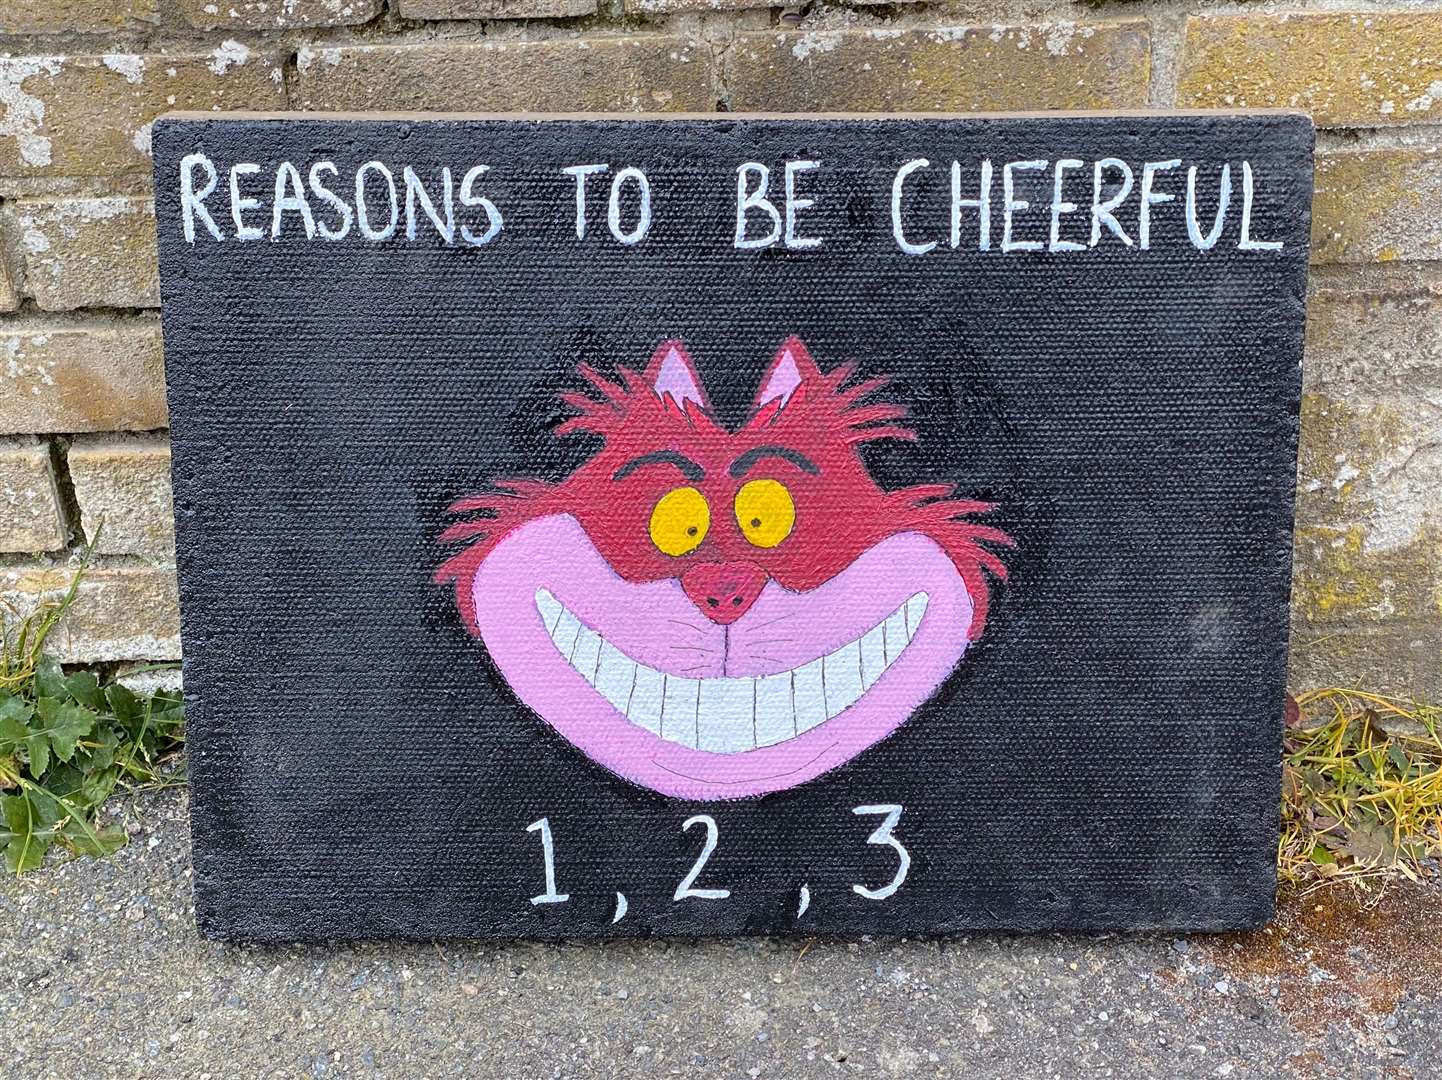 The unwavering grin of a Cheshire Cat is among the paintings on paving slabs that have been left around River near Dover by Vicky Thomas